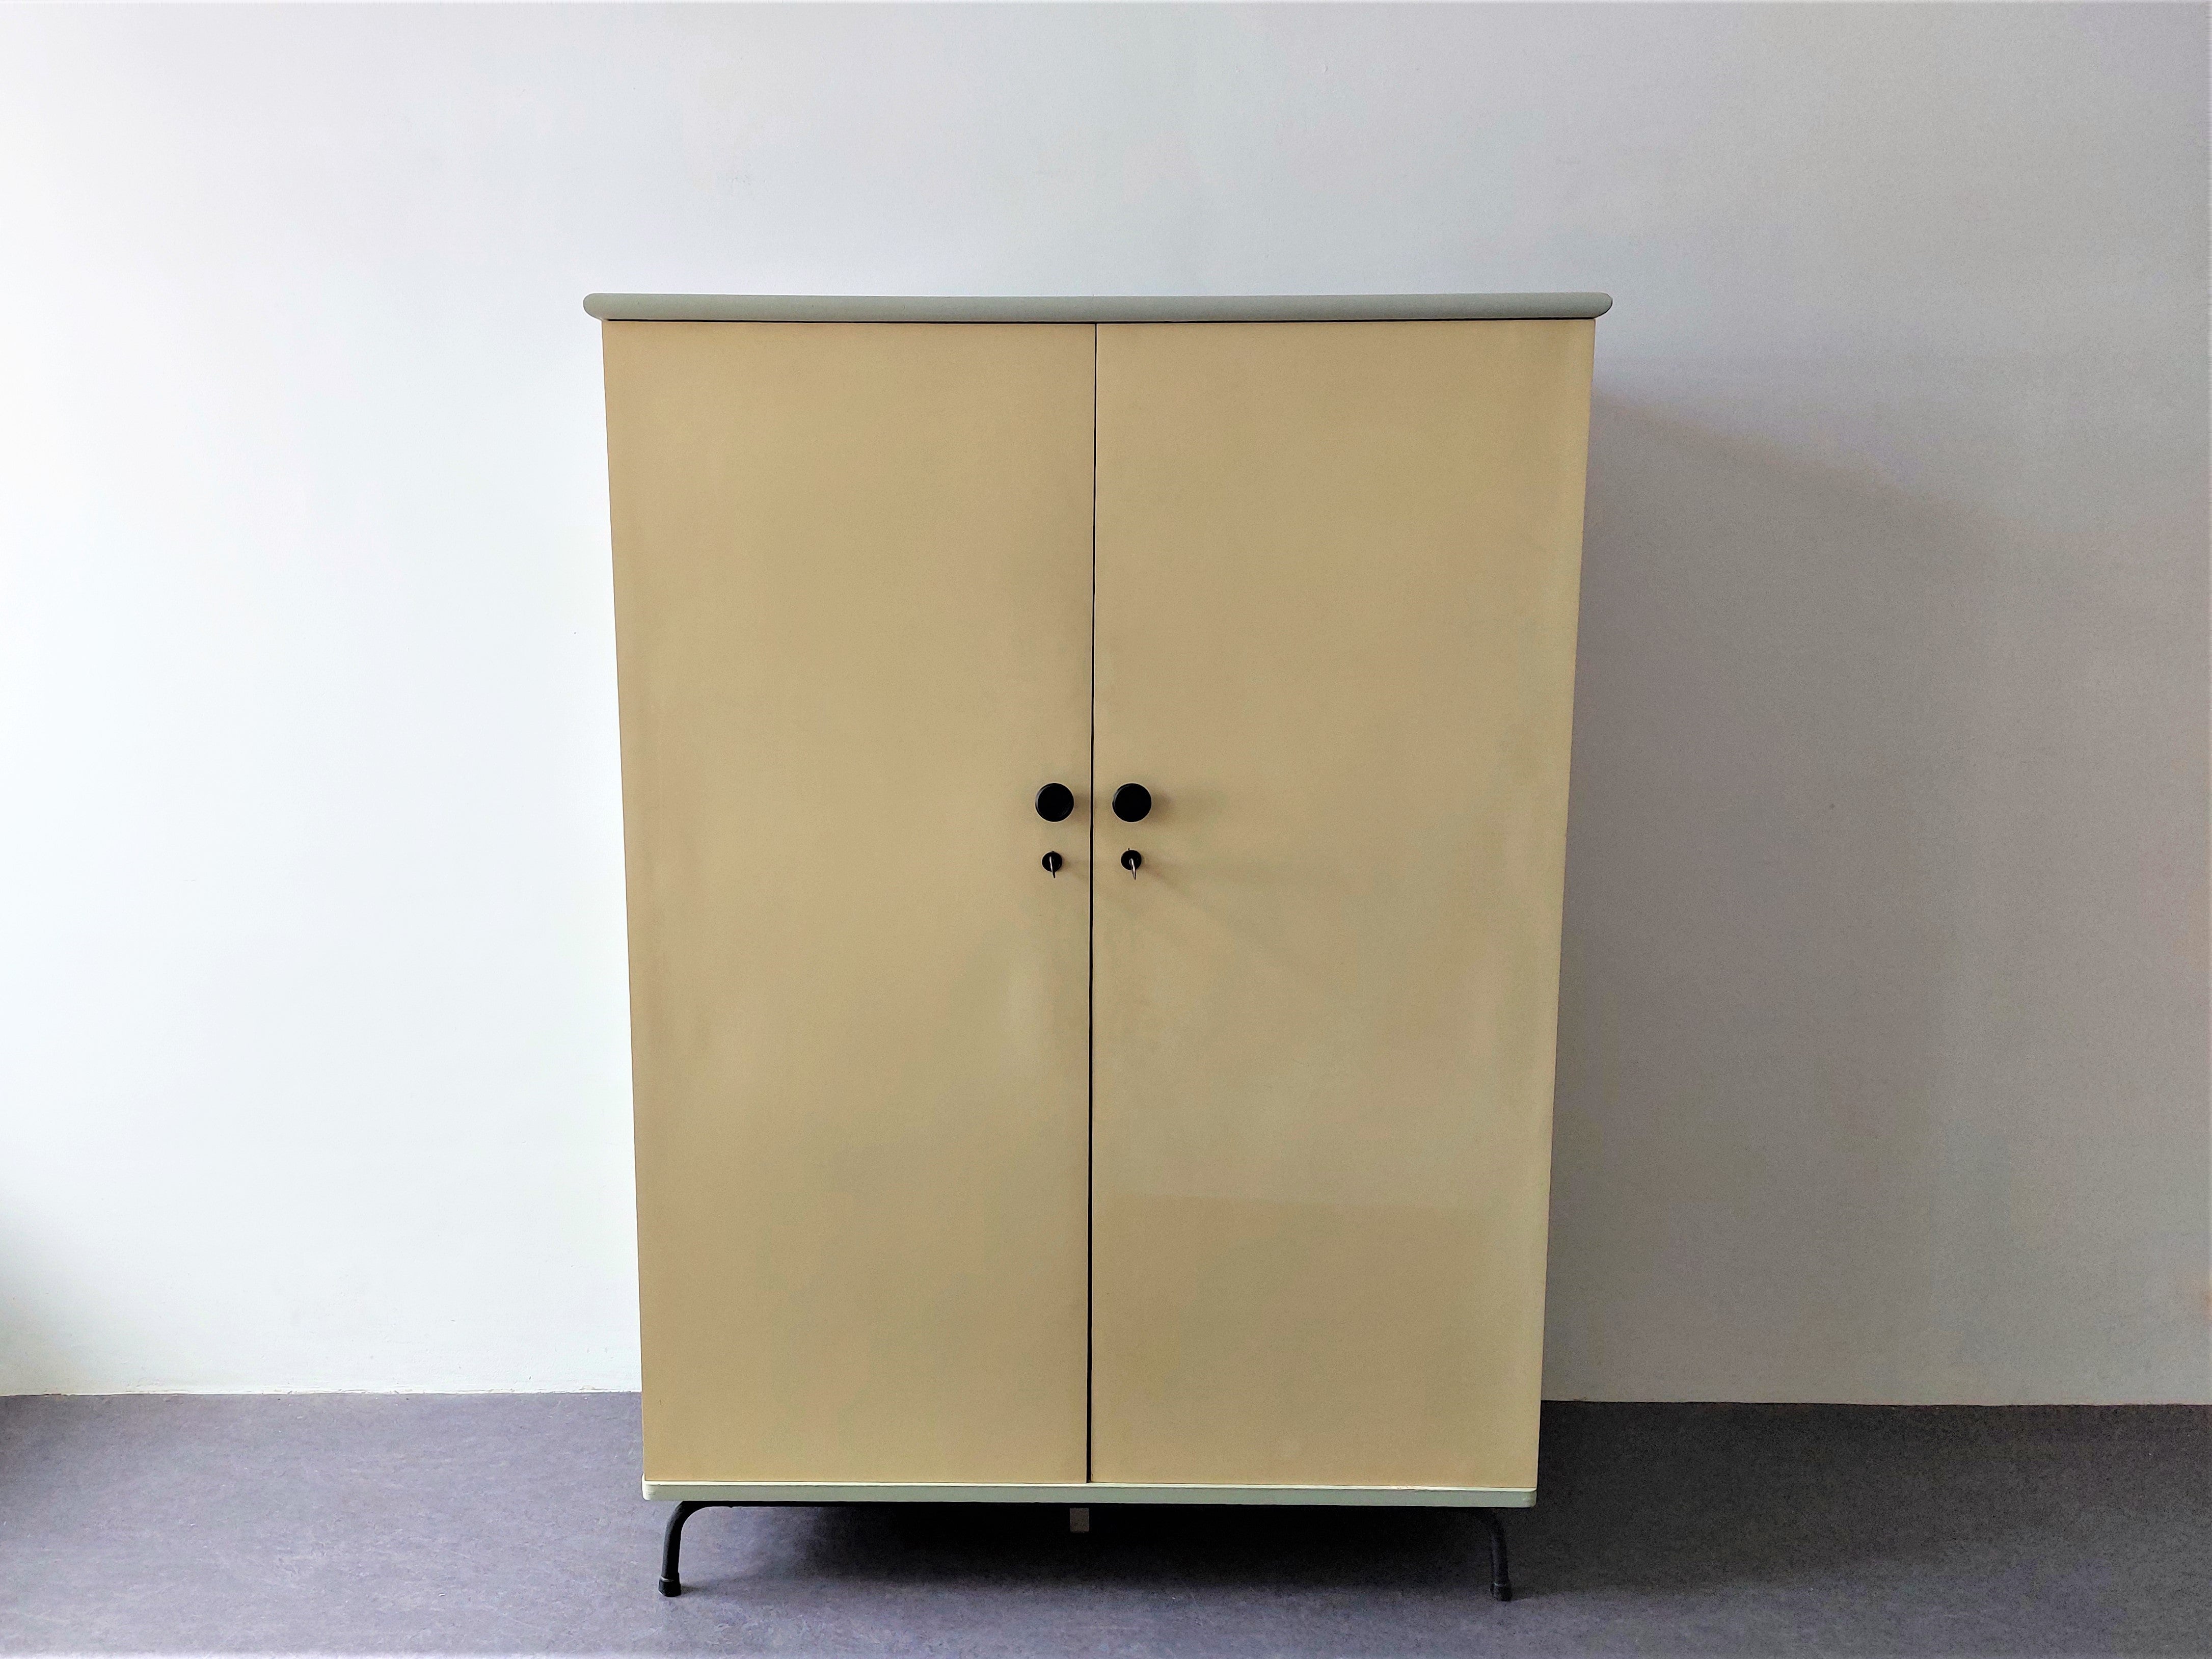 This refined wooden bedroom closet was designed for the former and renowned Dutch bed manufacturer DICO in the 1950's. It was part of the 'Kamer 56' (translated: Room '56) serie, that also has furniture designed by Rob Parry. This cabinet has a